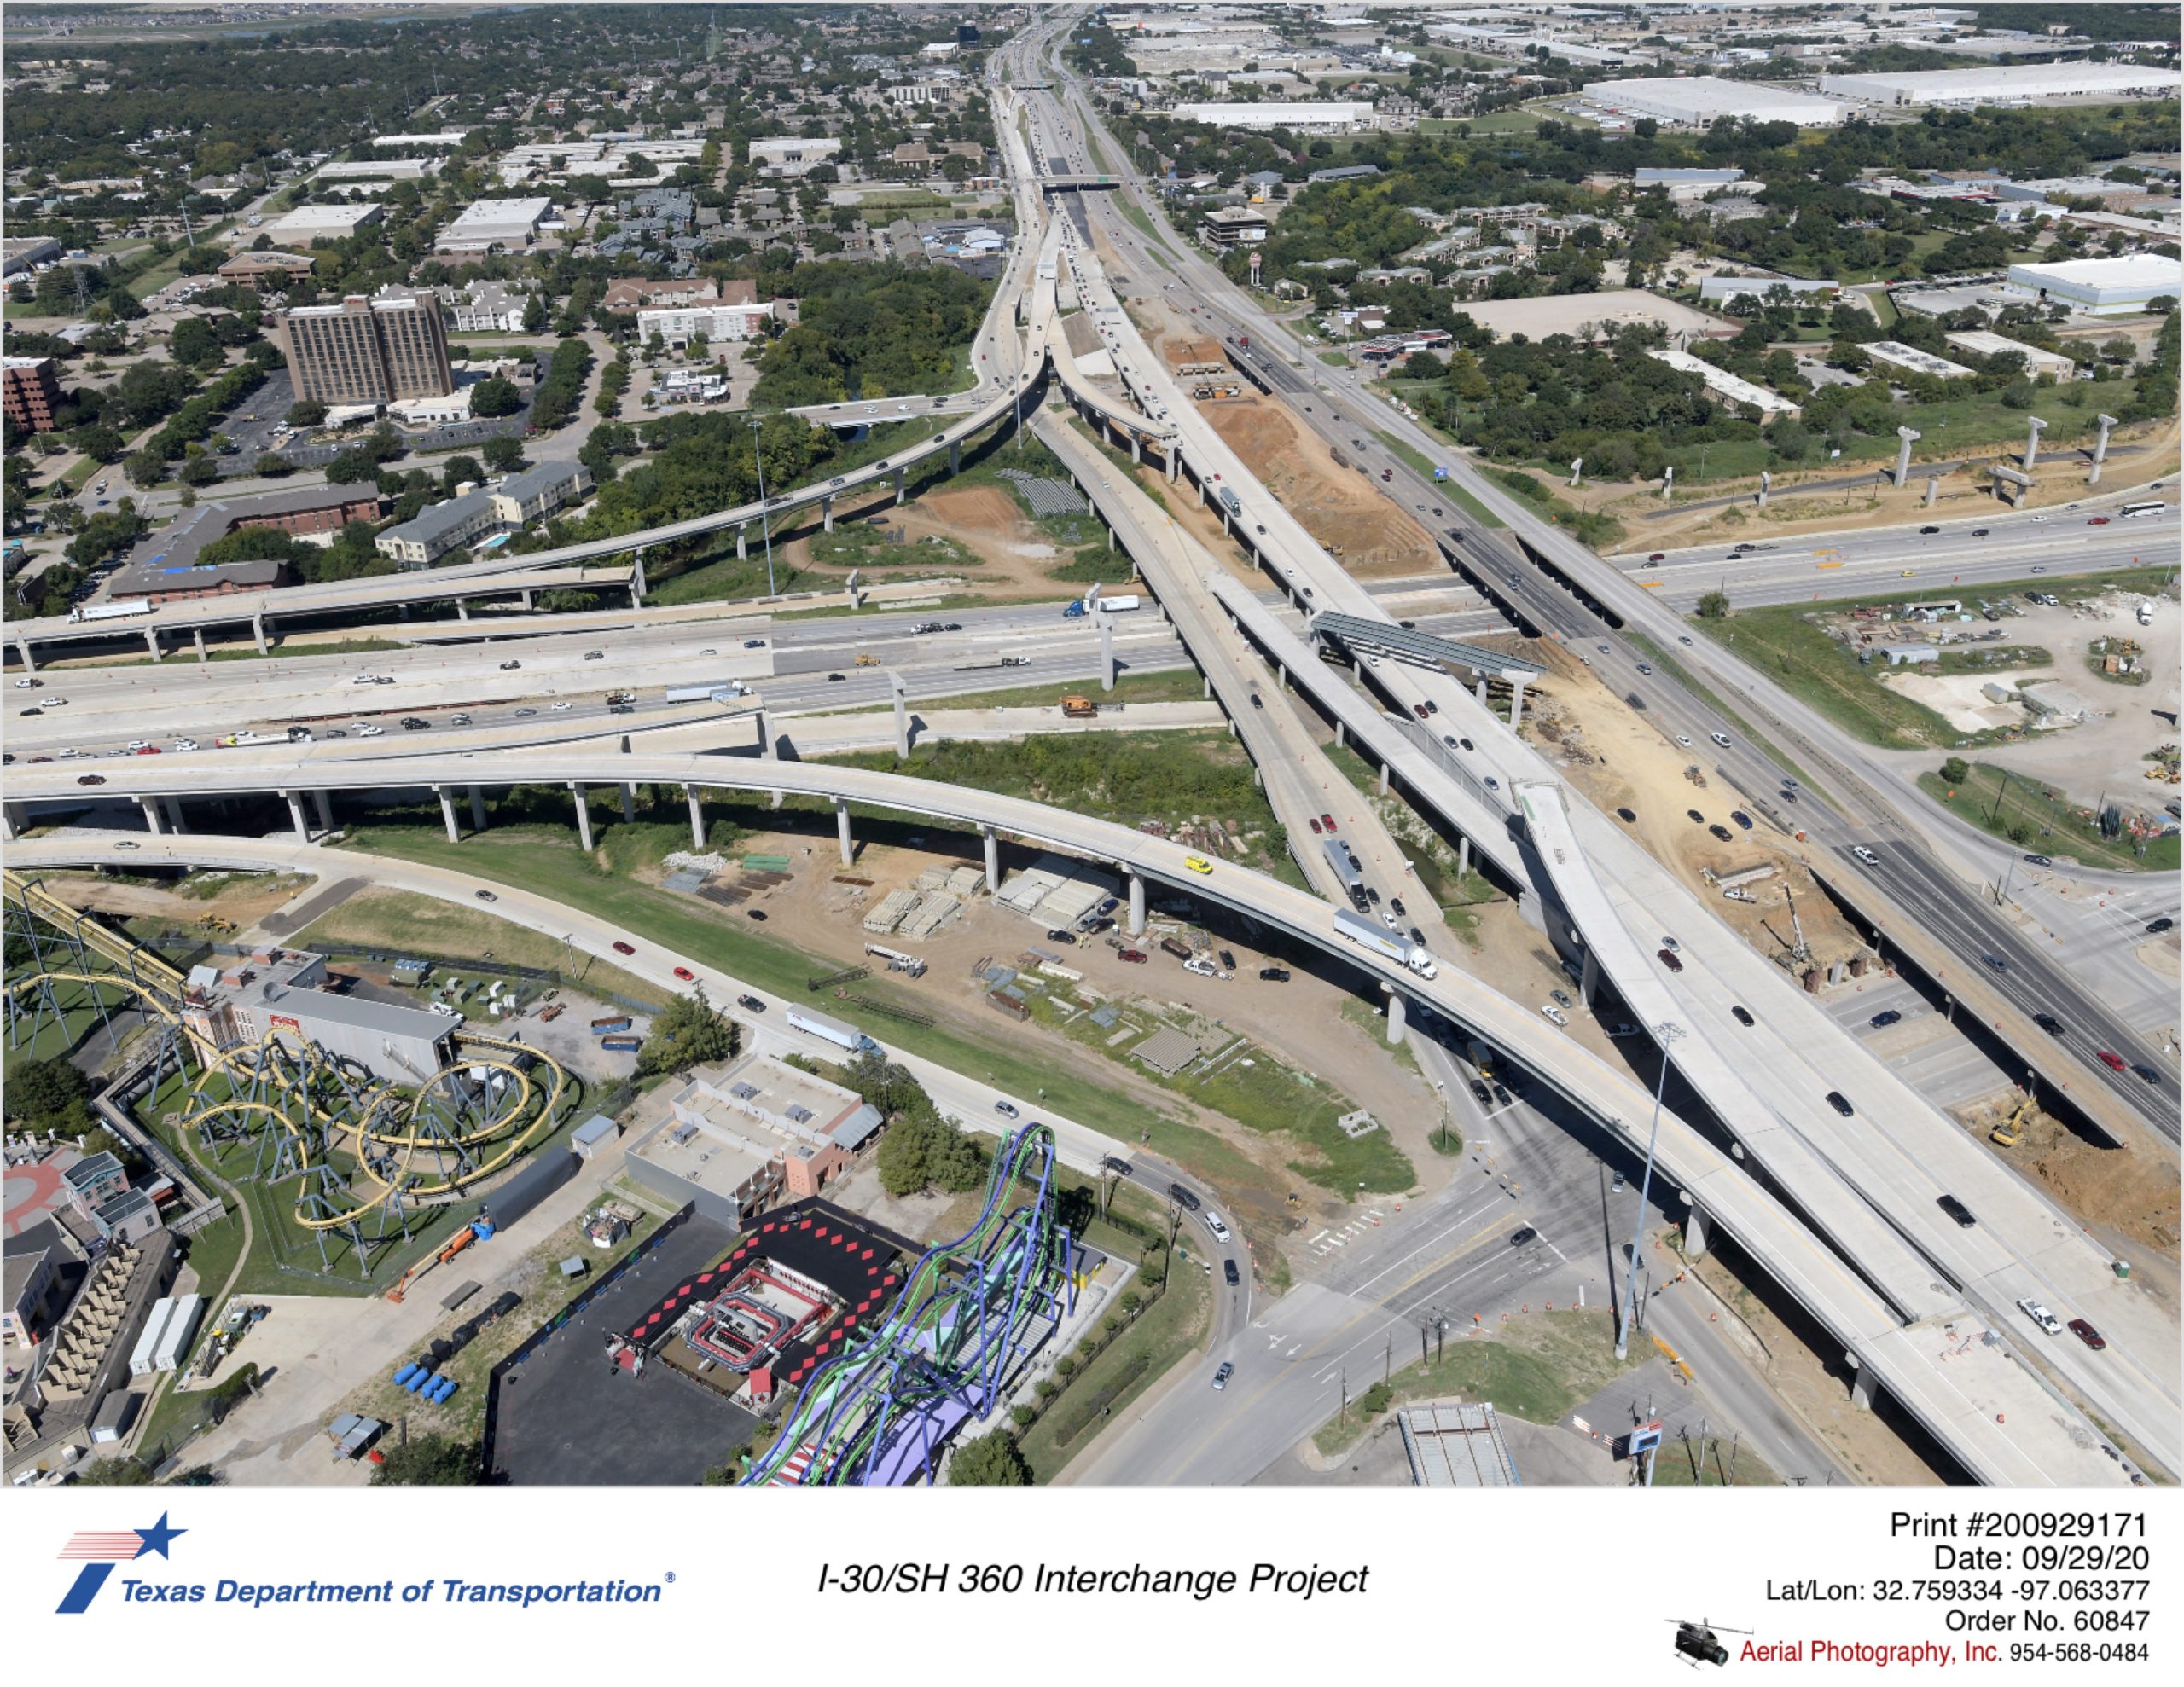 I-30/SH 360 interchange looking north northeast at new SH 360 southbound mainlane bridge in service and new direct connectors now in service.